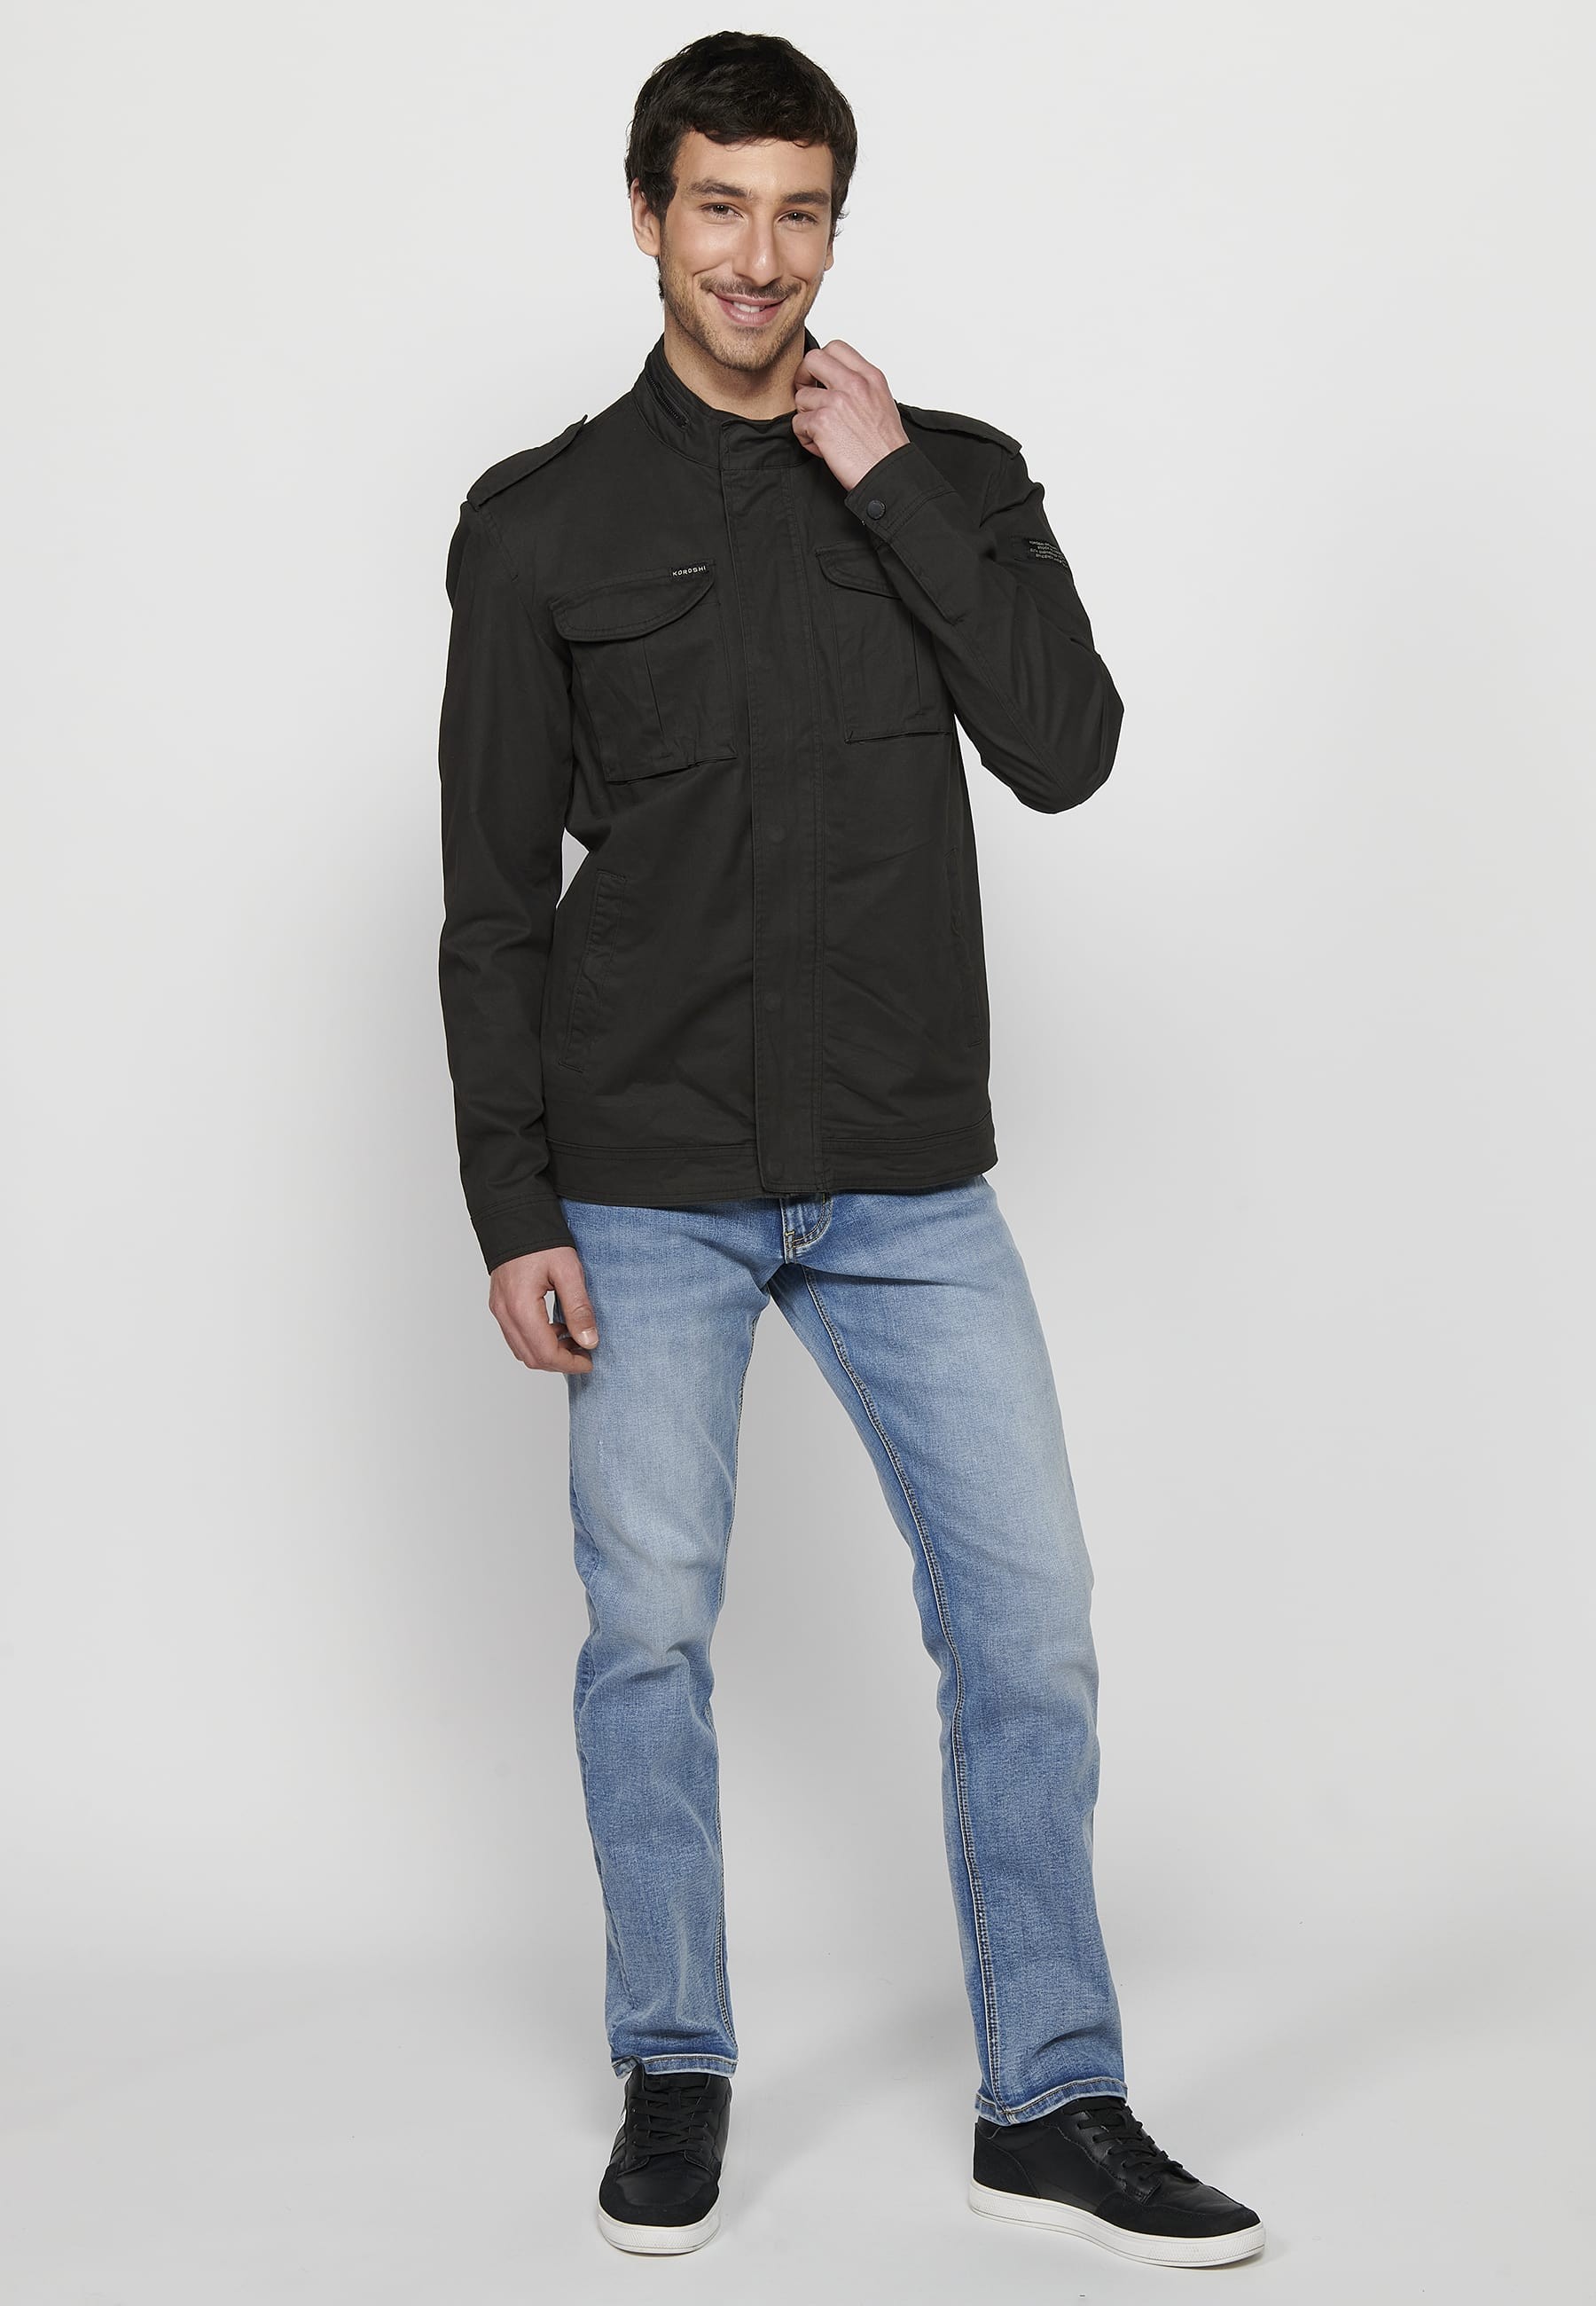 Long-sleeved jacket with high collar and front zipper closure with pockets in black for men. 2